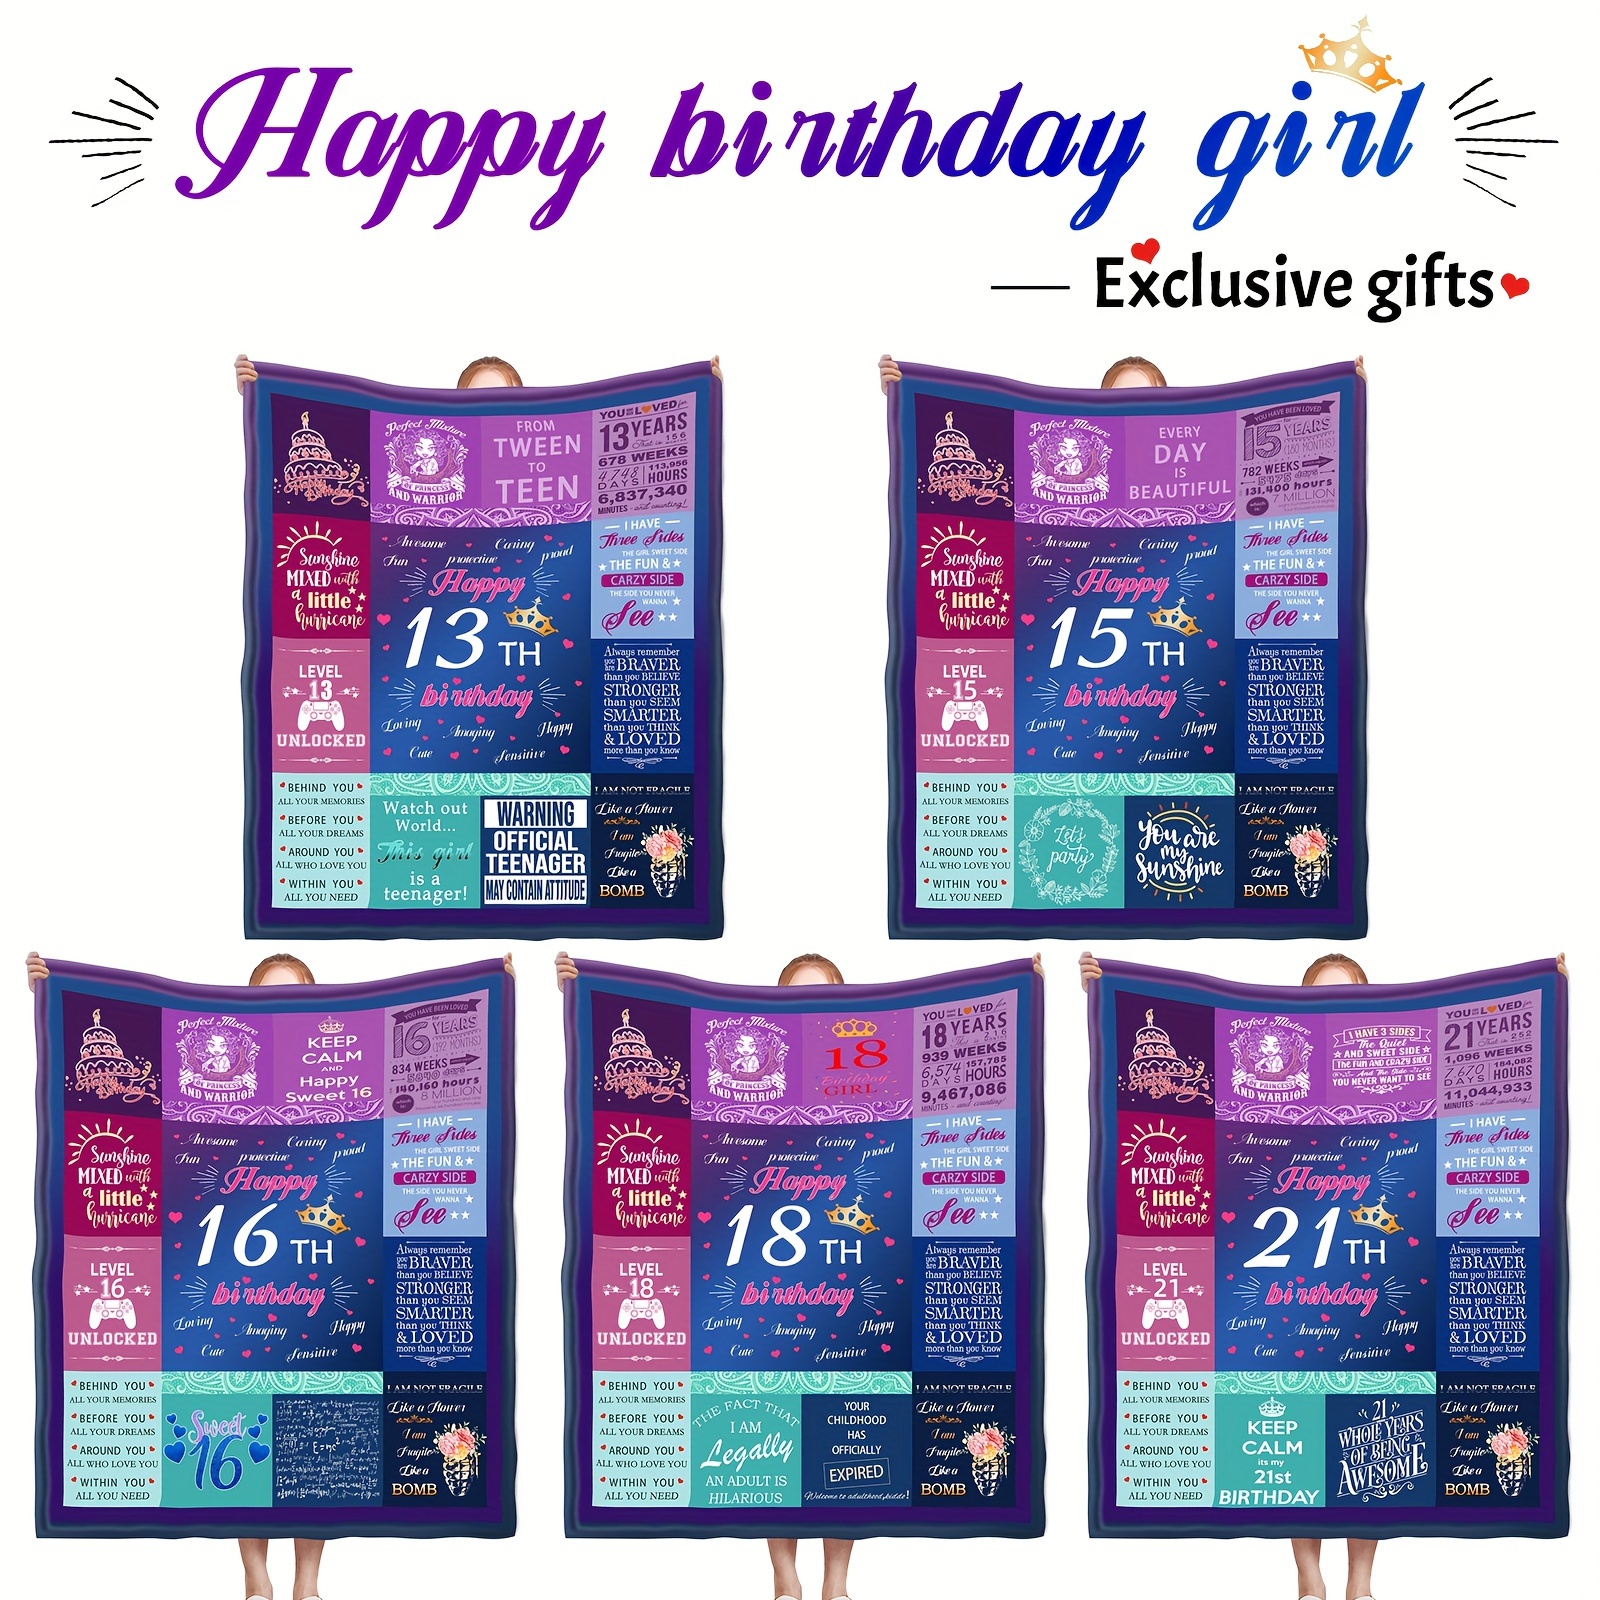 10 Year Old Girl Gift Ideas Blanket 80x60 - Gifts for 10 Year Old Girl -  10th Birthday Decorations for Girl - 10 Year Old Girl Birthday Gifts - Best